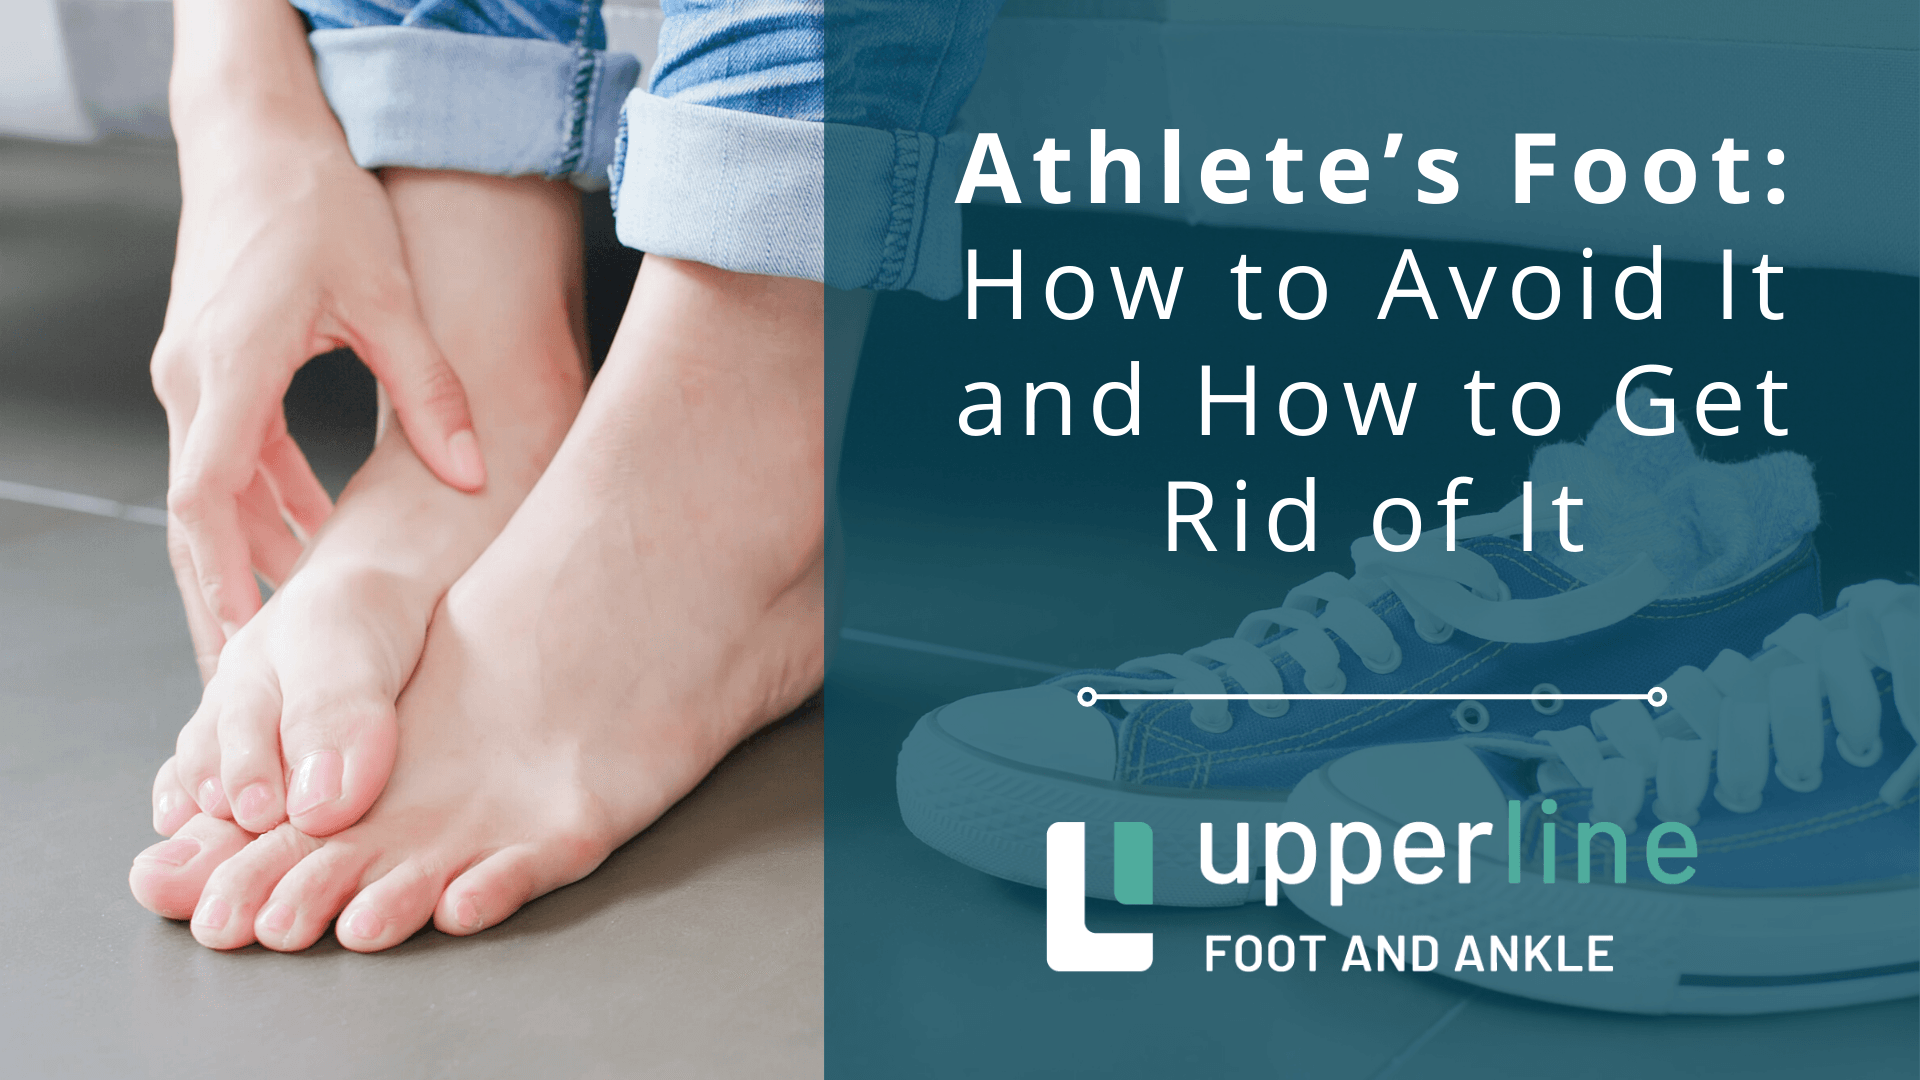 How do I know if I have a stress fracture in my foot?